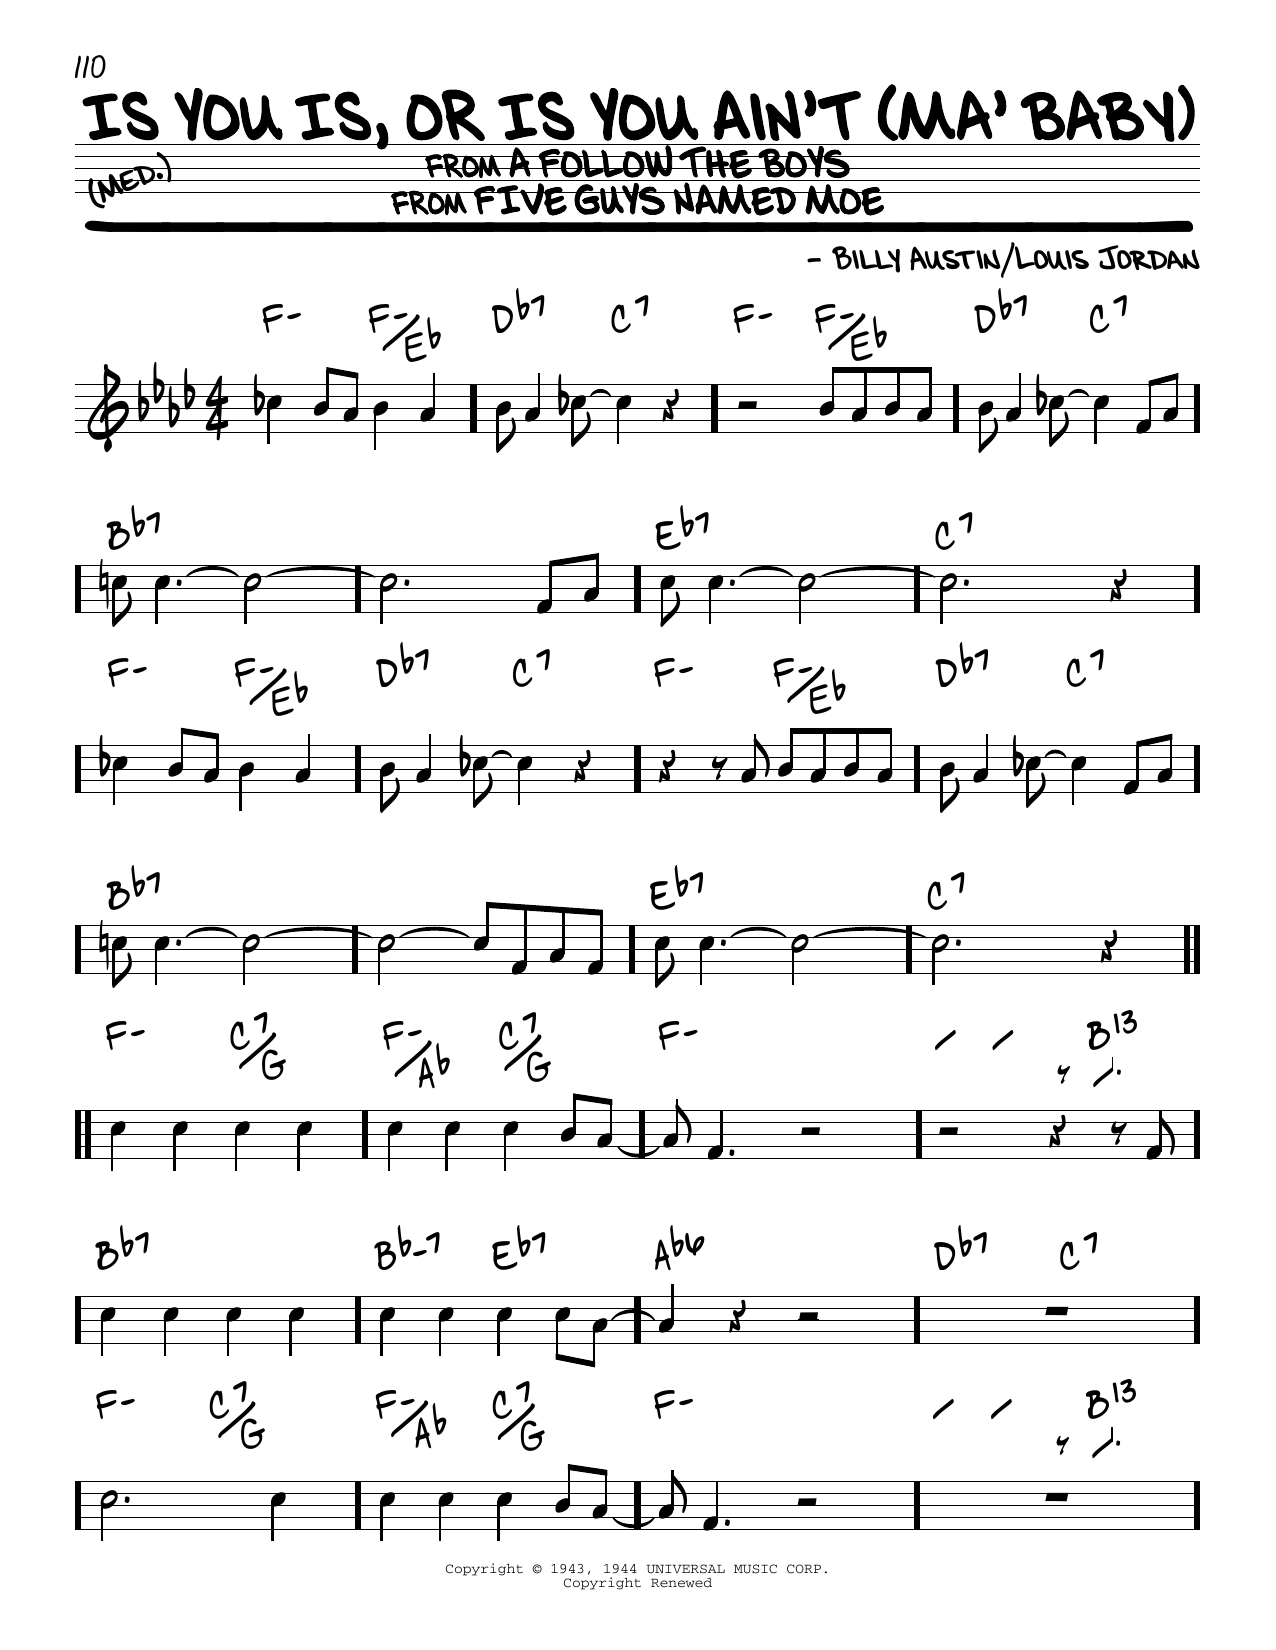 Download Billy Austin Is You Is, Or Is You Ain't (Ma' Baby) Sheet Music